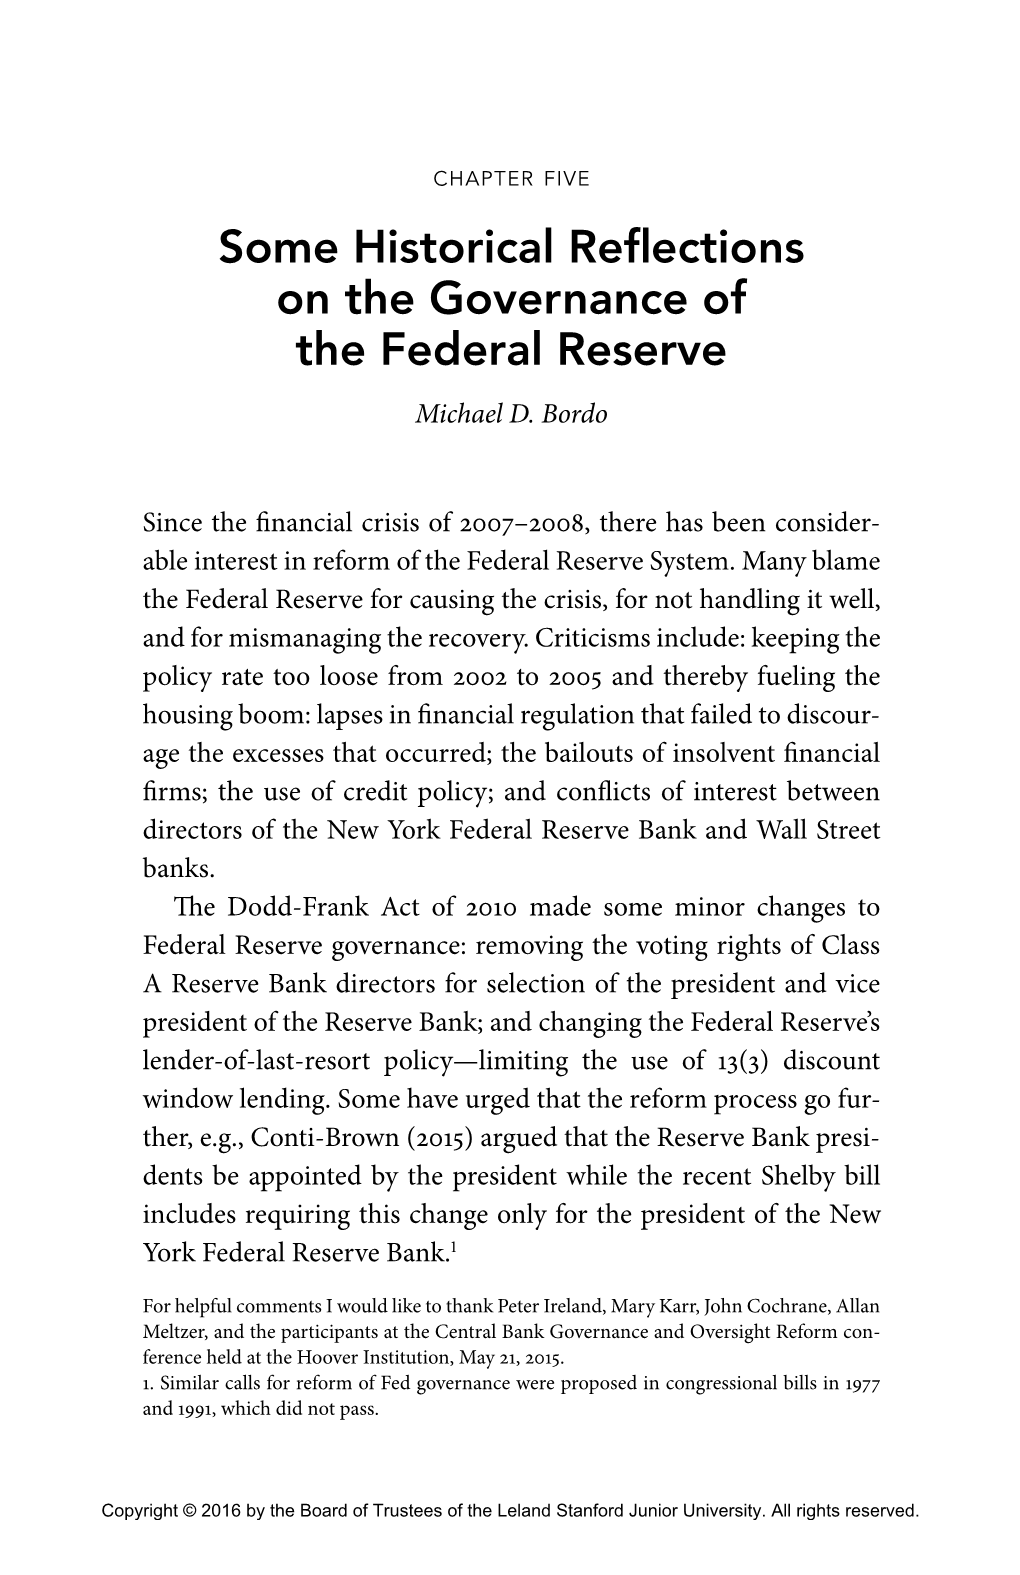 Some Historical Reflections on the Governance of the Federal Reserve by Michael D. Bordo